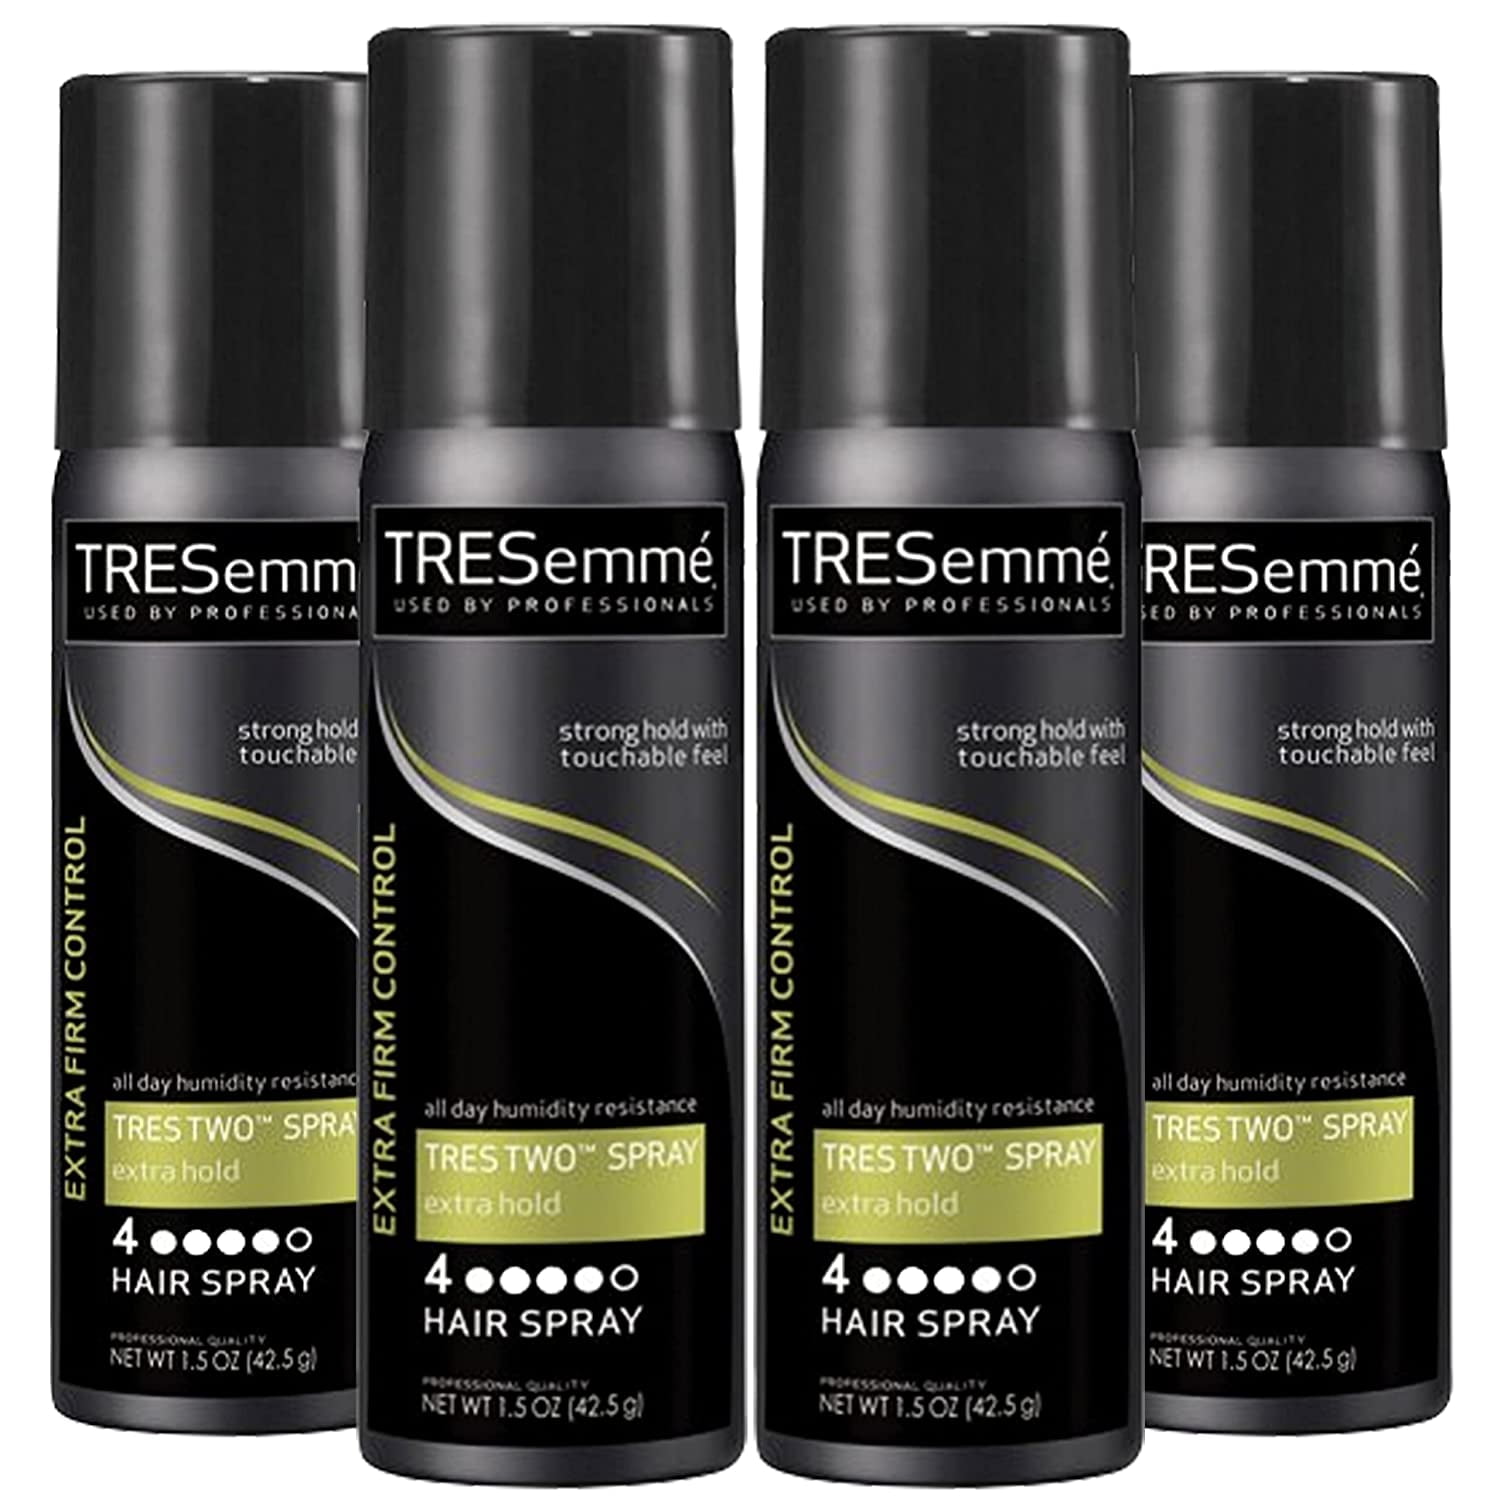 TRESemmé Tres Two Spray Extra Hold Hairspray, Extra-Firm Control, Strong  Hold with Touchable Feel, Humidity Resistant, All Day Frizz Control,  oz  each(Pack of 4) 